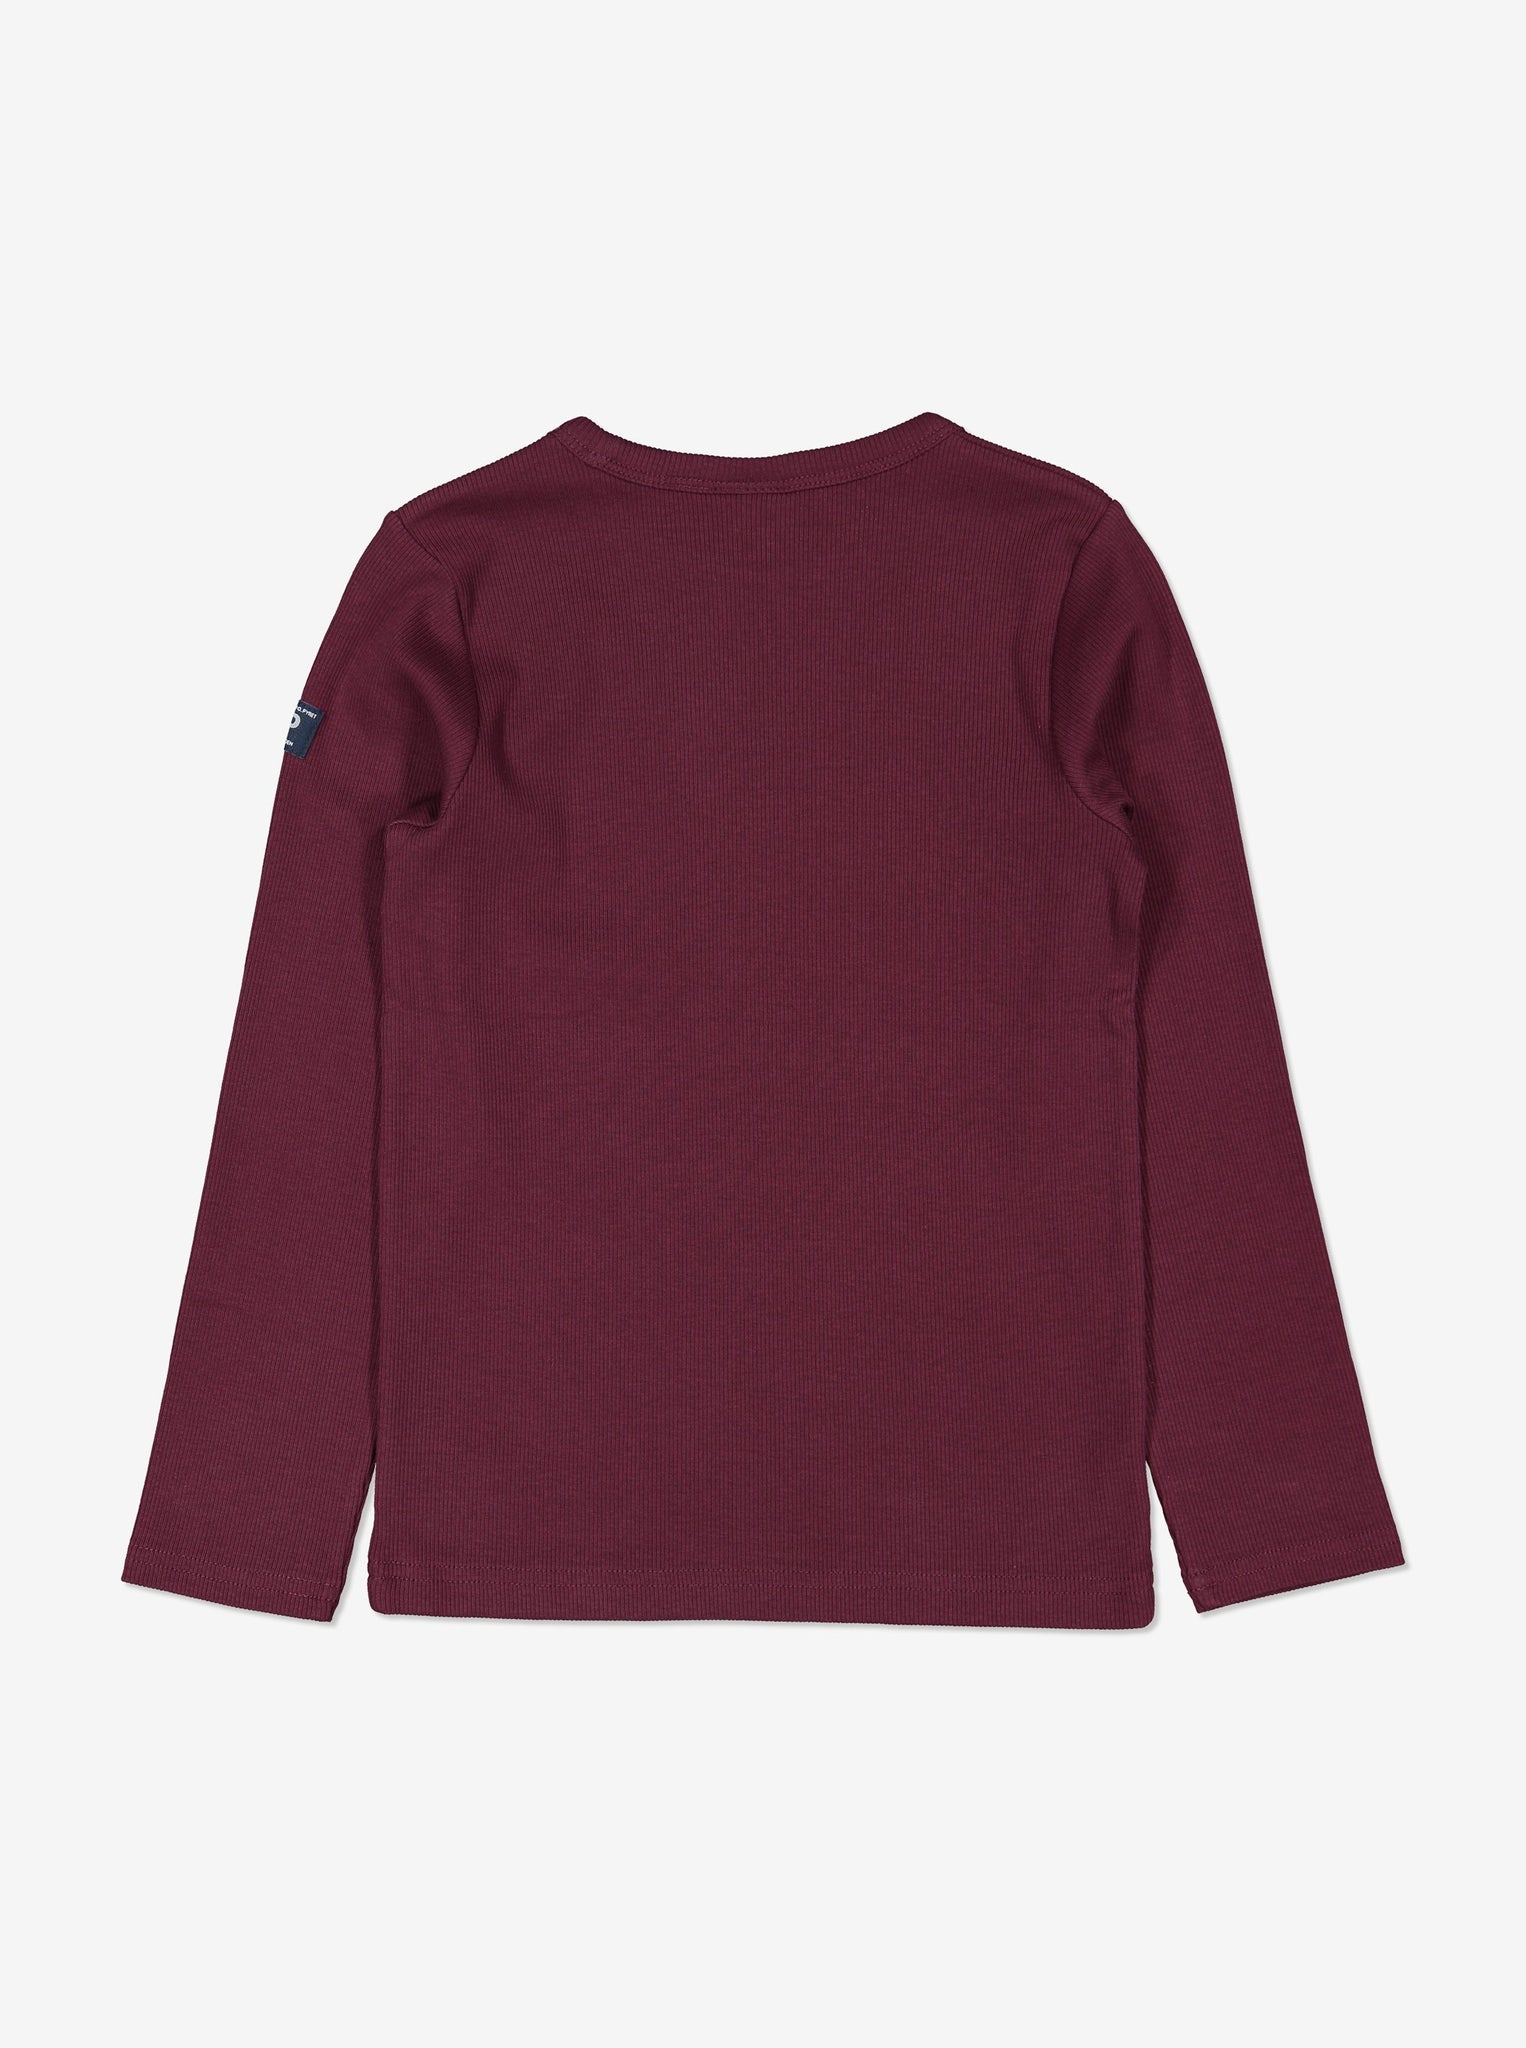 Back view of kids burgundy red top in soft organic cotton